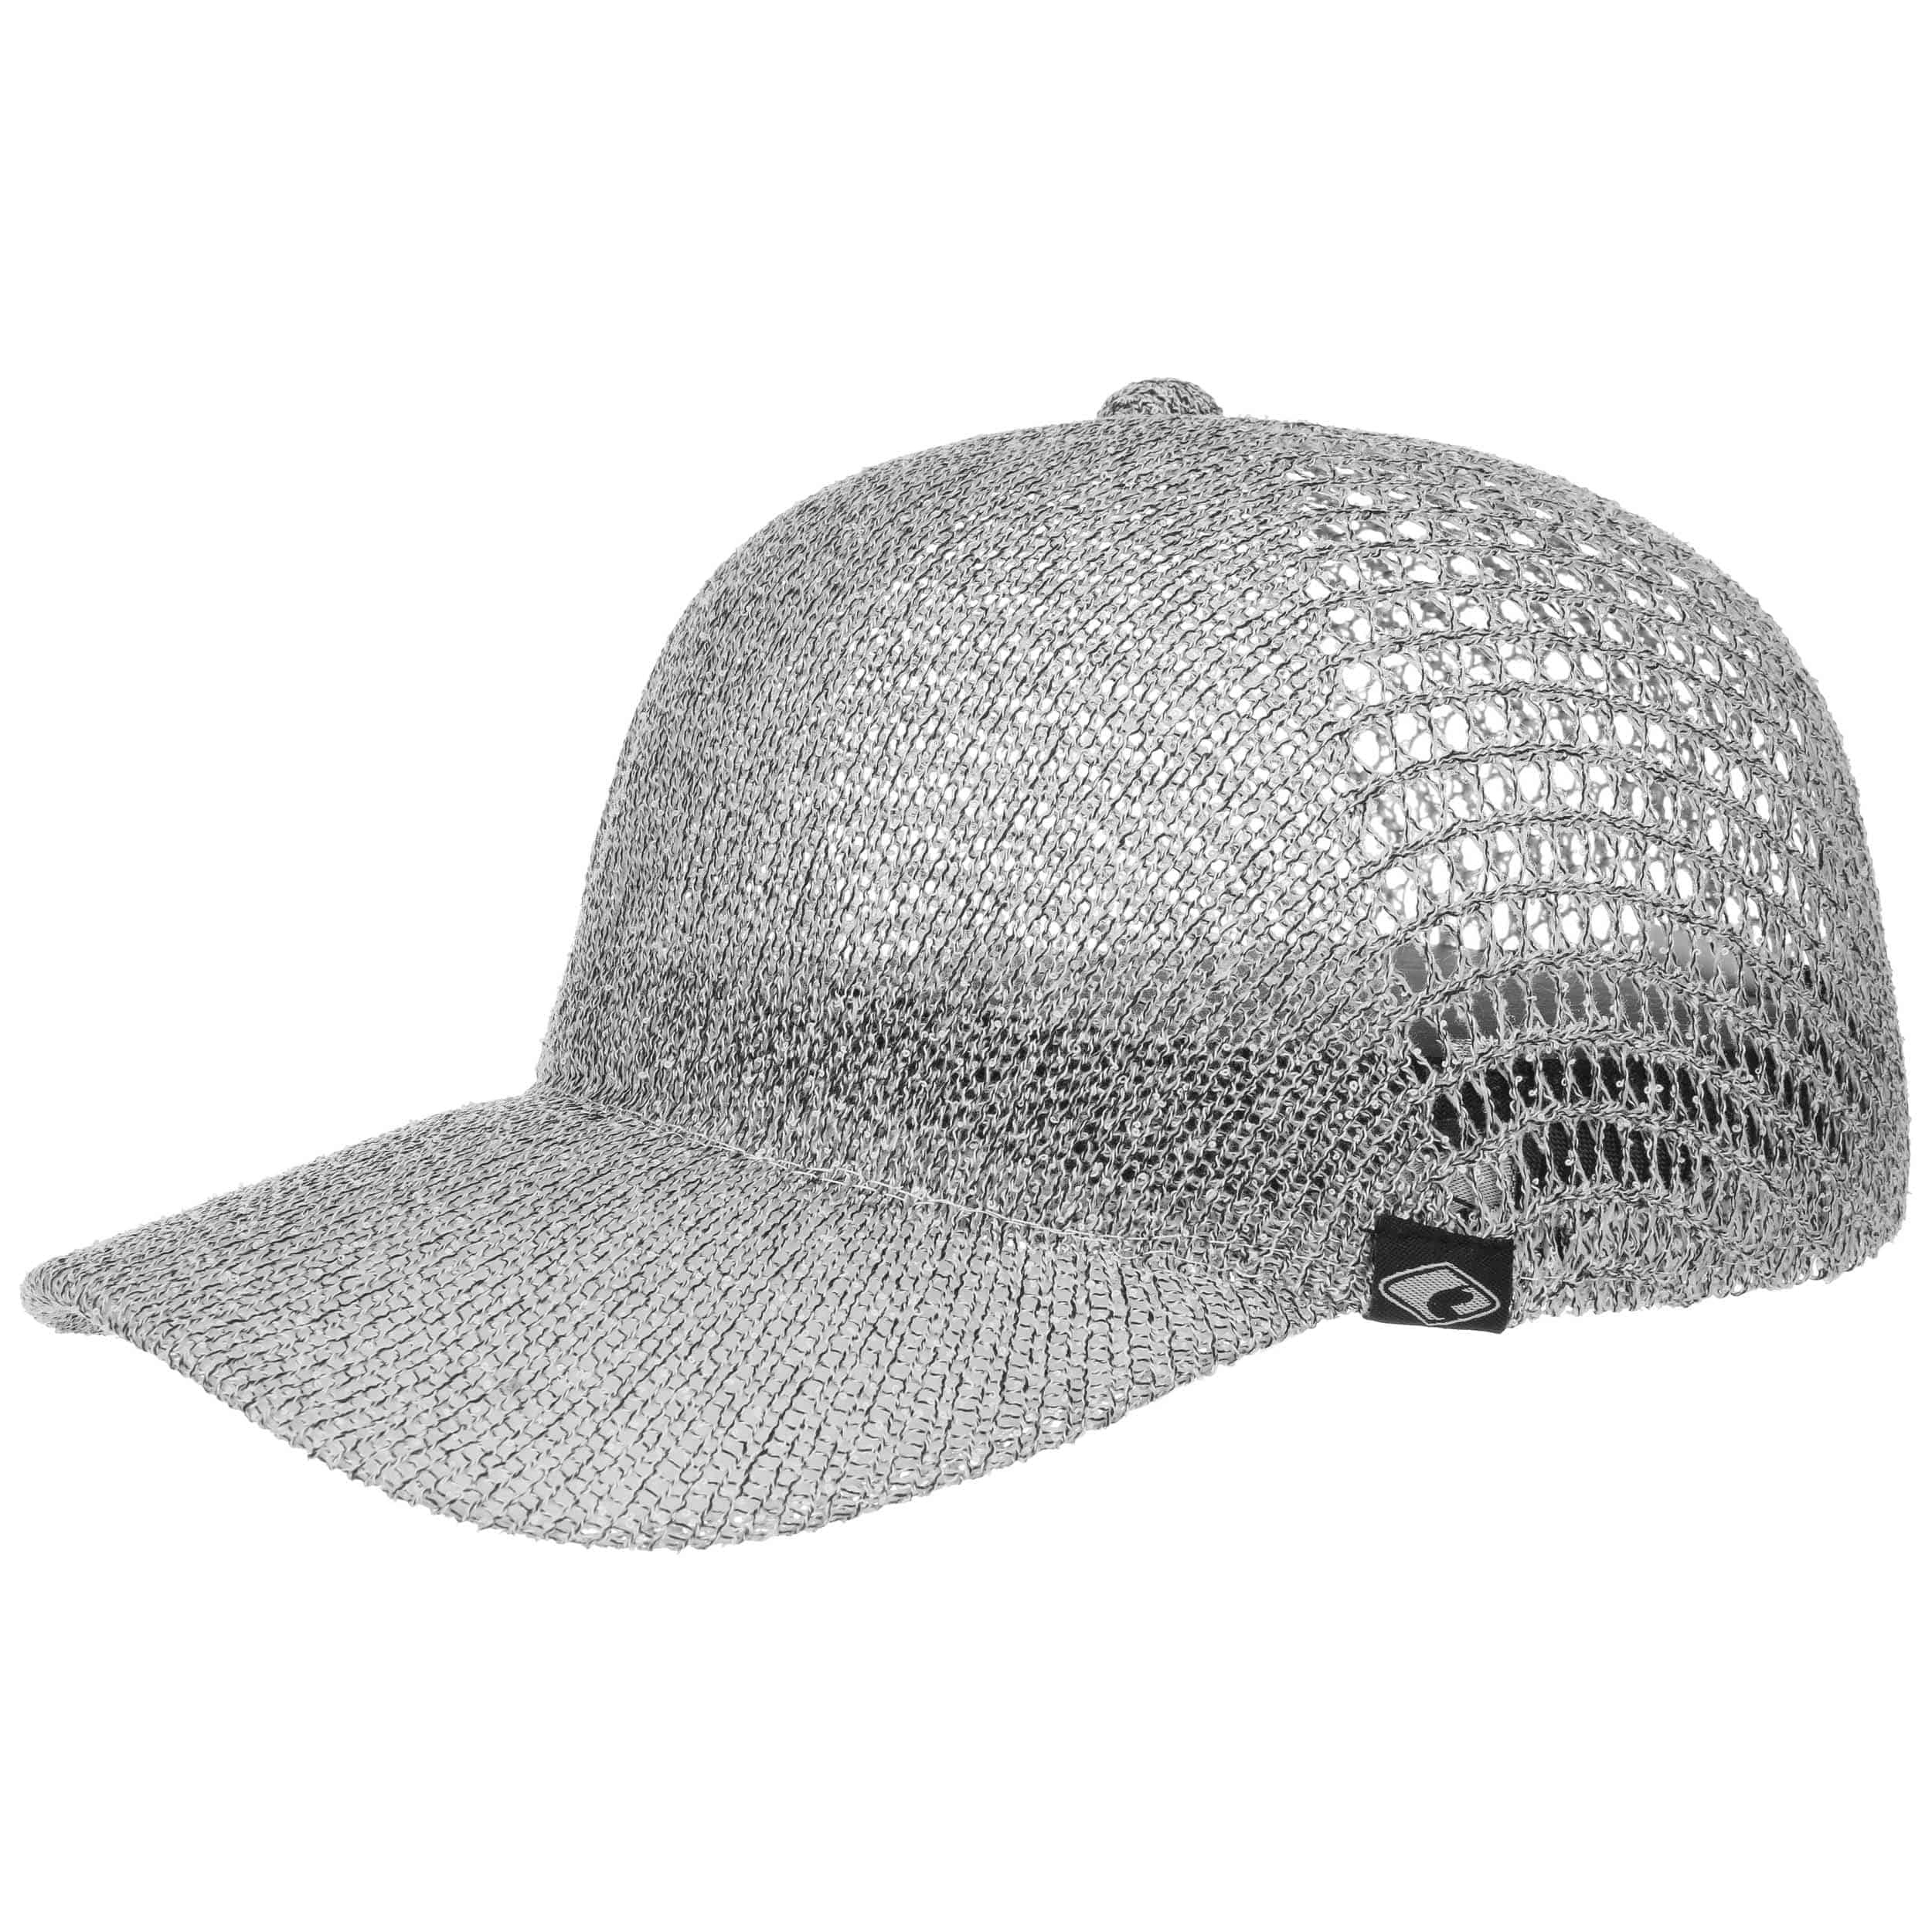 Ultralight Cap by Chillouts - 21,95 €